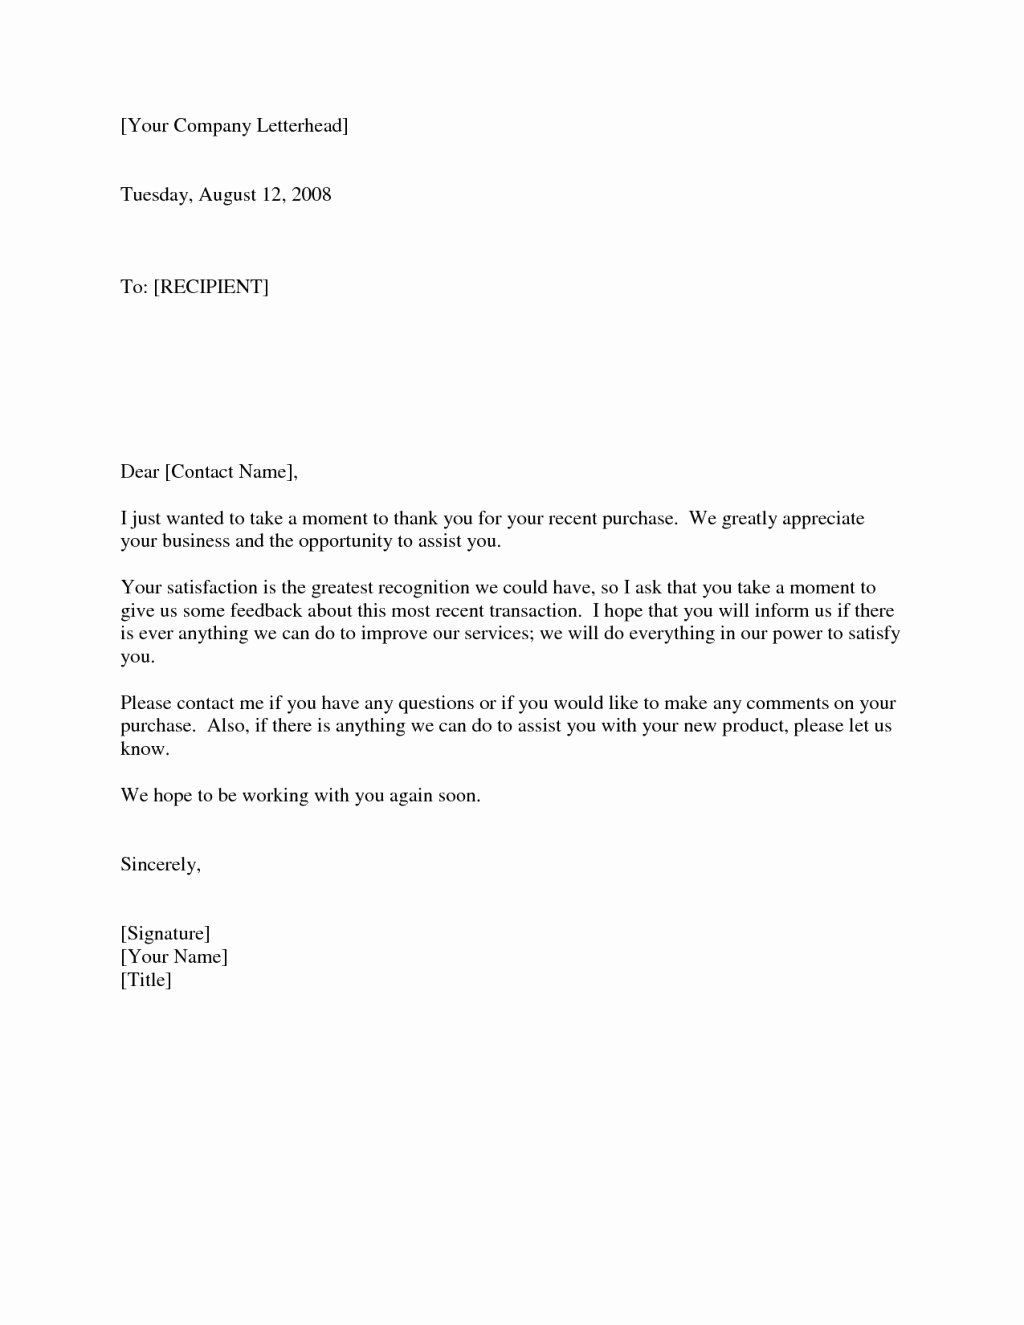 Thank You Letter to Client New 024 Businessetter Thank You for Your Customer Sample New